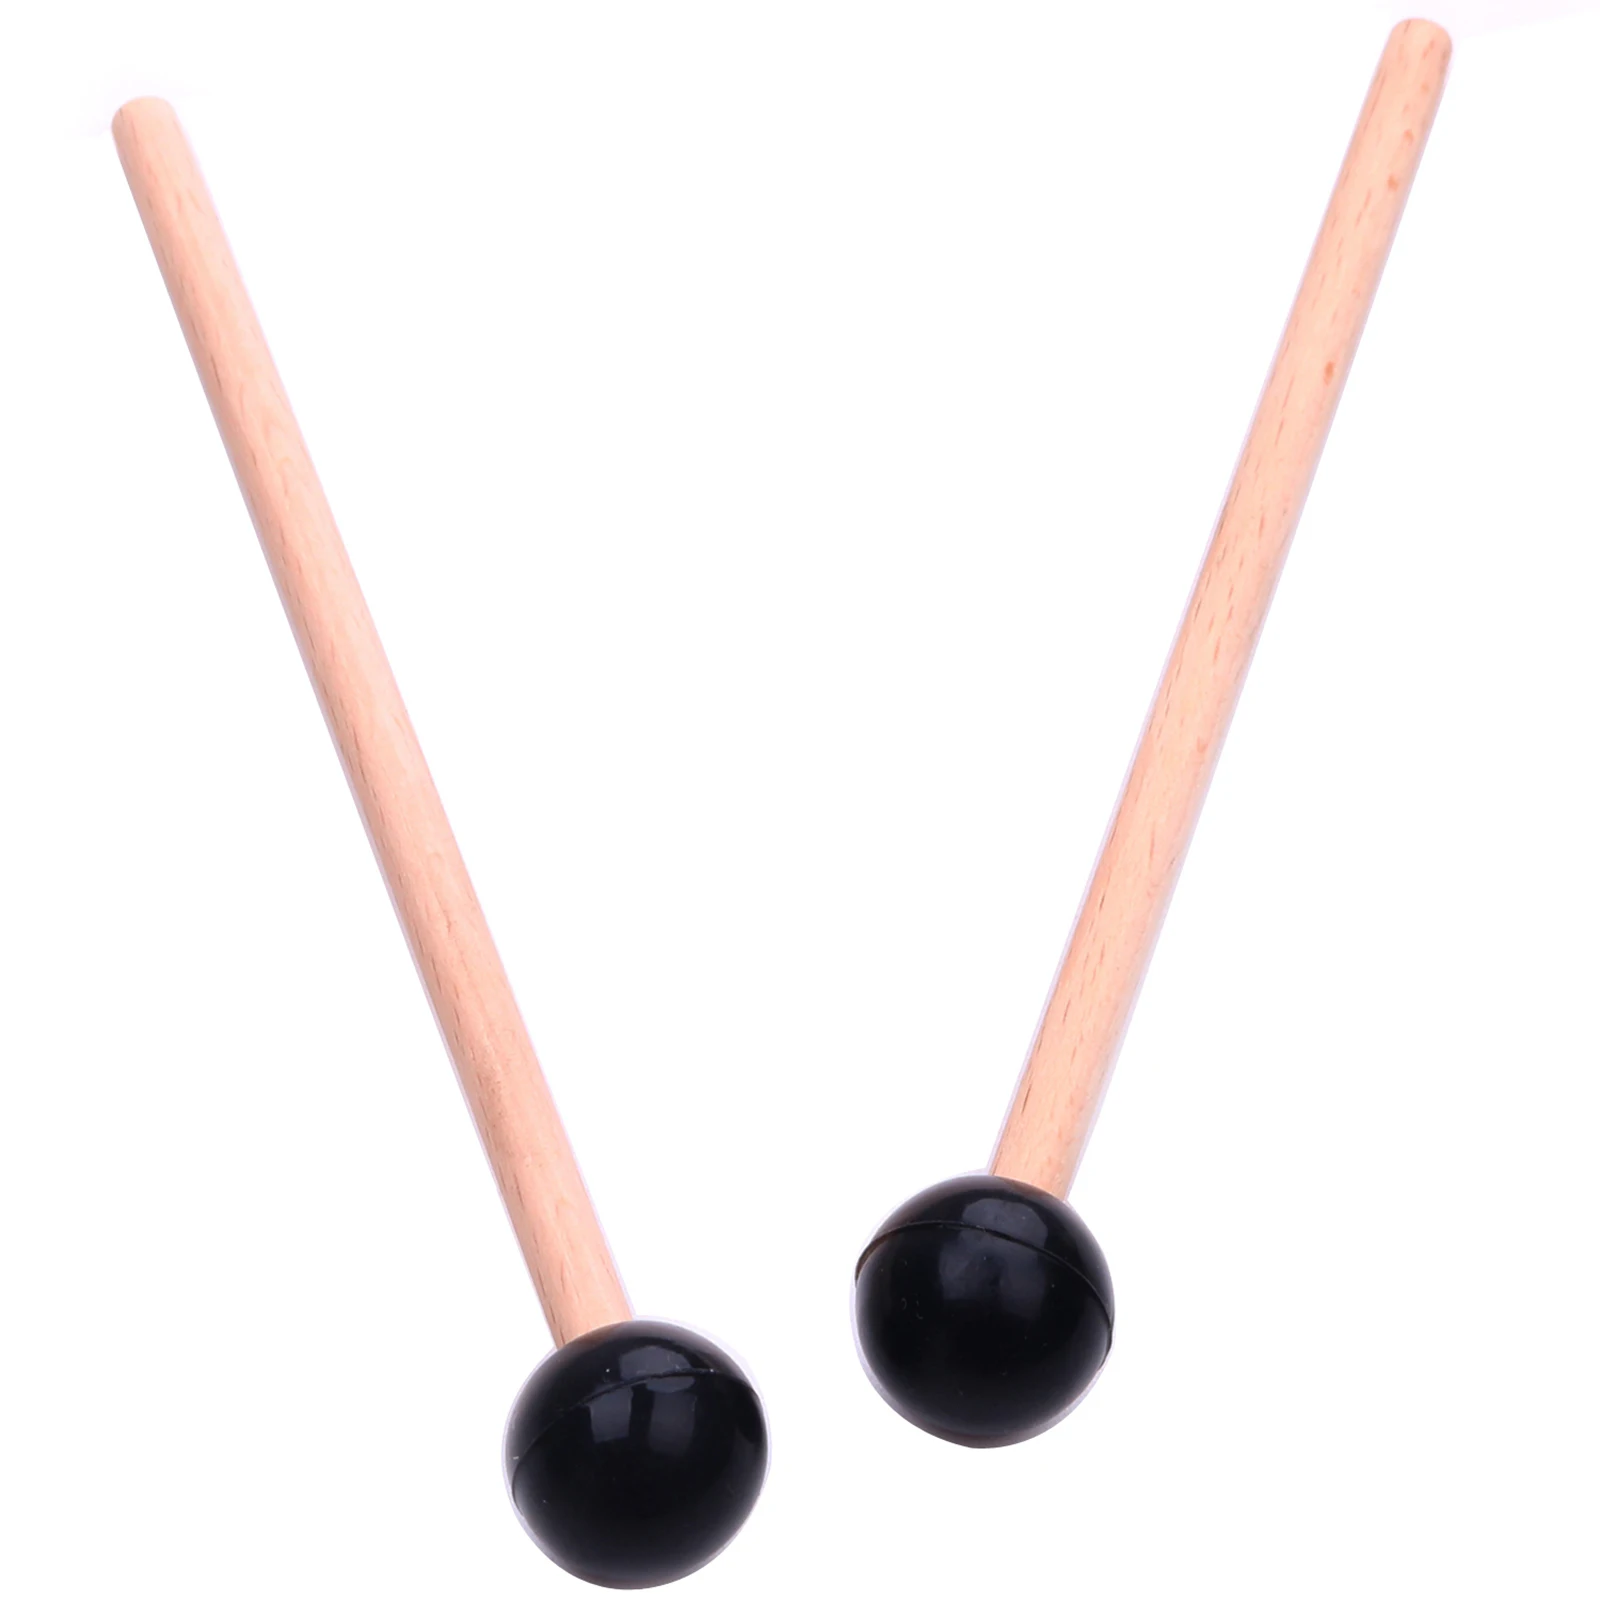 1 Pair Professional Wood Drumstick Percussion Rubber Head Marimba Mallets Instrument Accessories 5.71inch